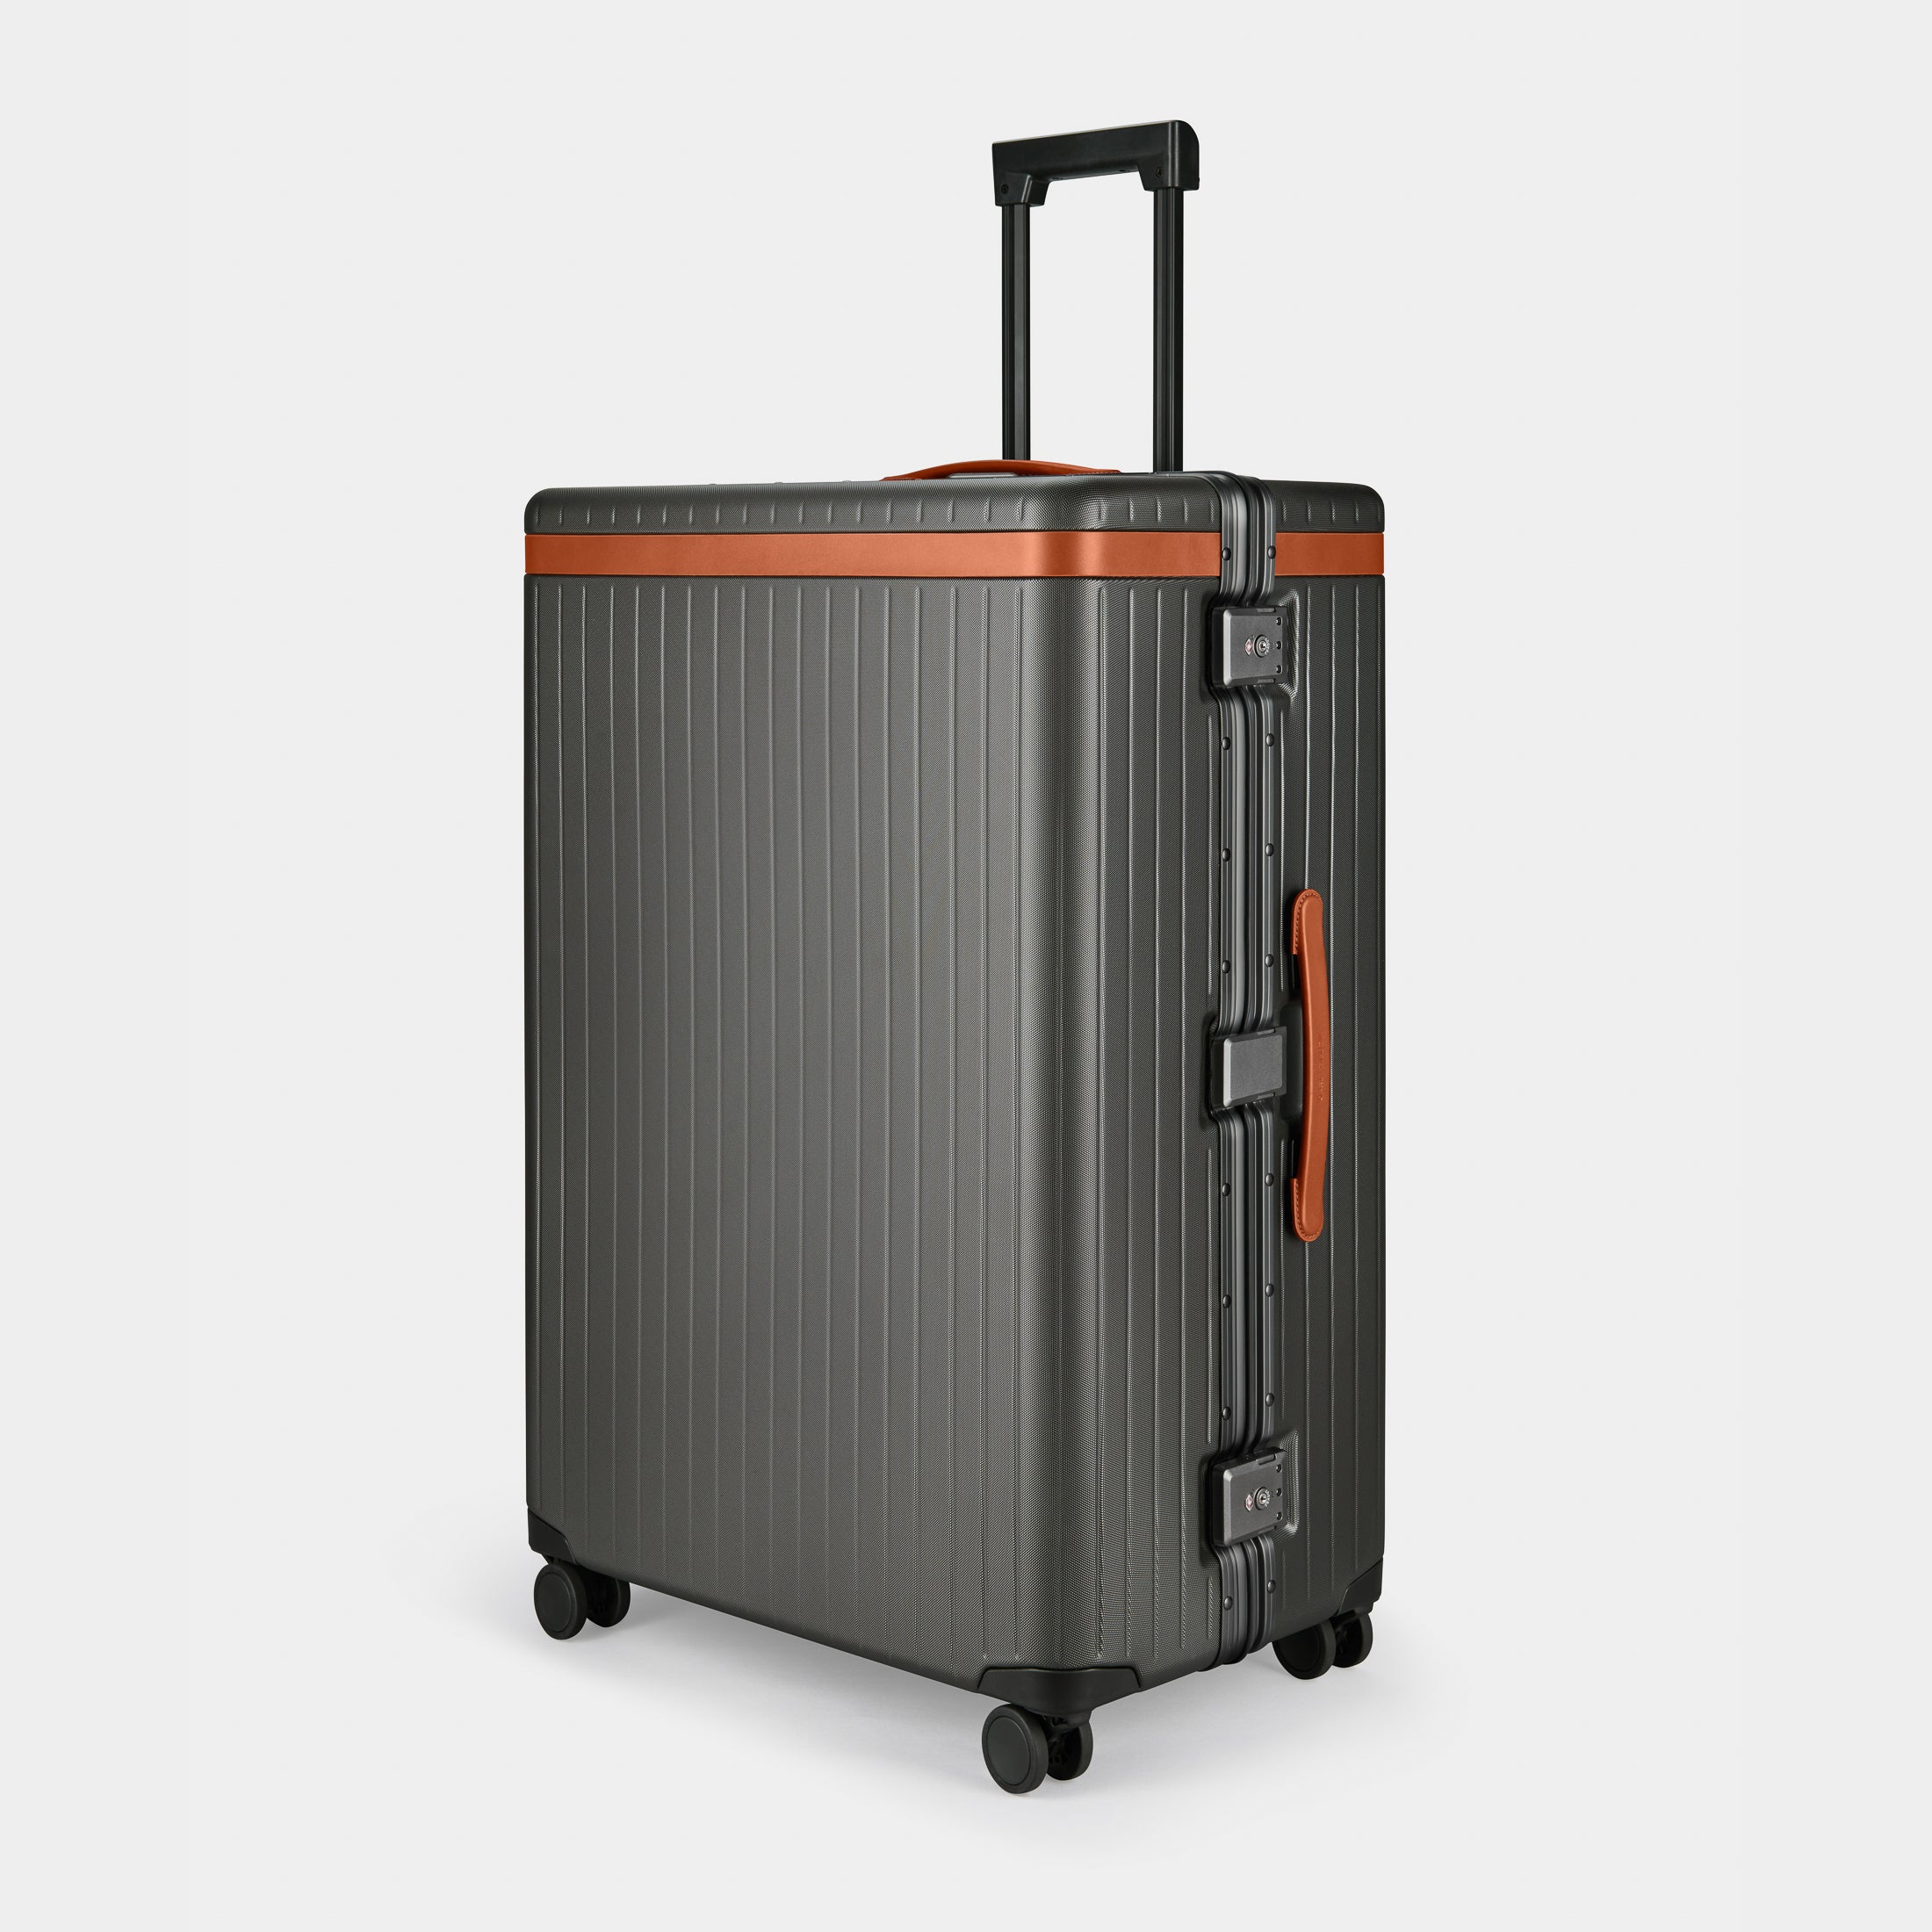 The Large Check-in - Return Grey / Cognac / Dotted Extra-large hard-shell suitcase